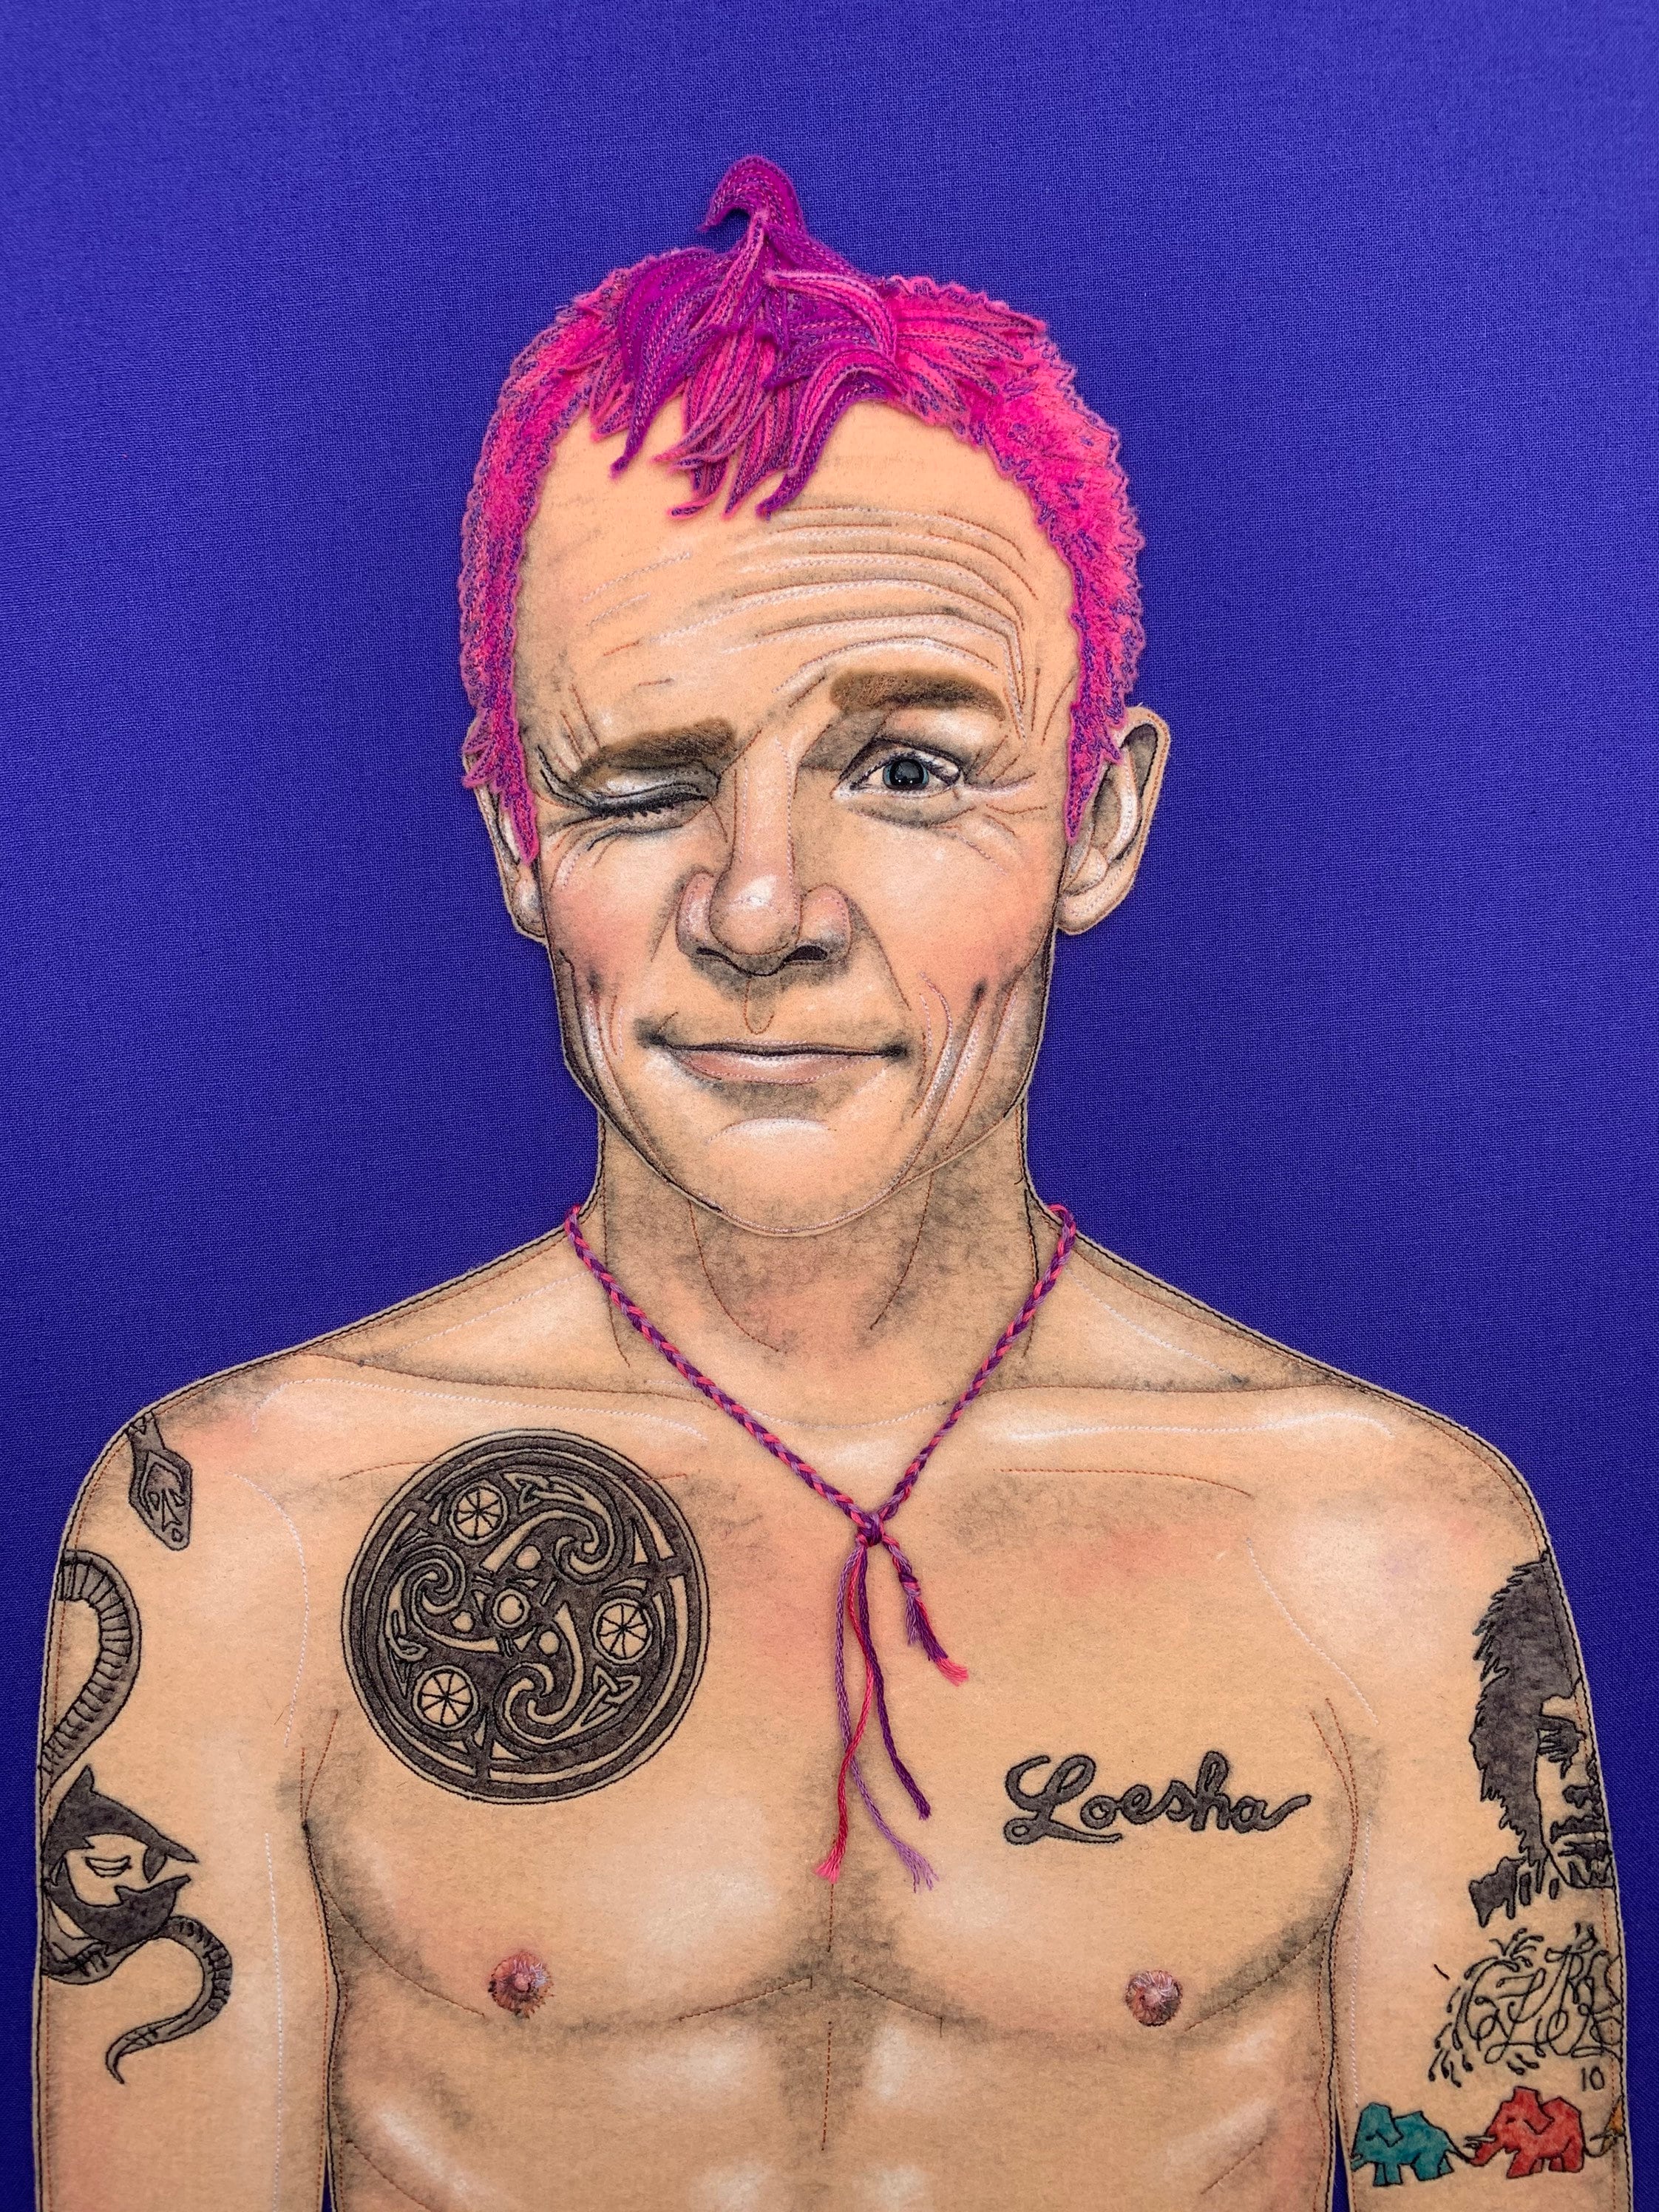 FLEA - RED HOT CHILI PEPPERS | Red hot chili peppers, Hottest chili pepper,  Chili pepper